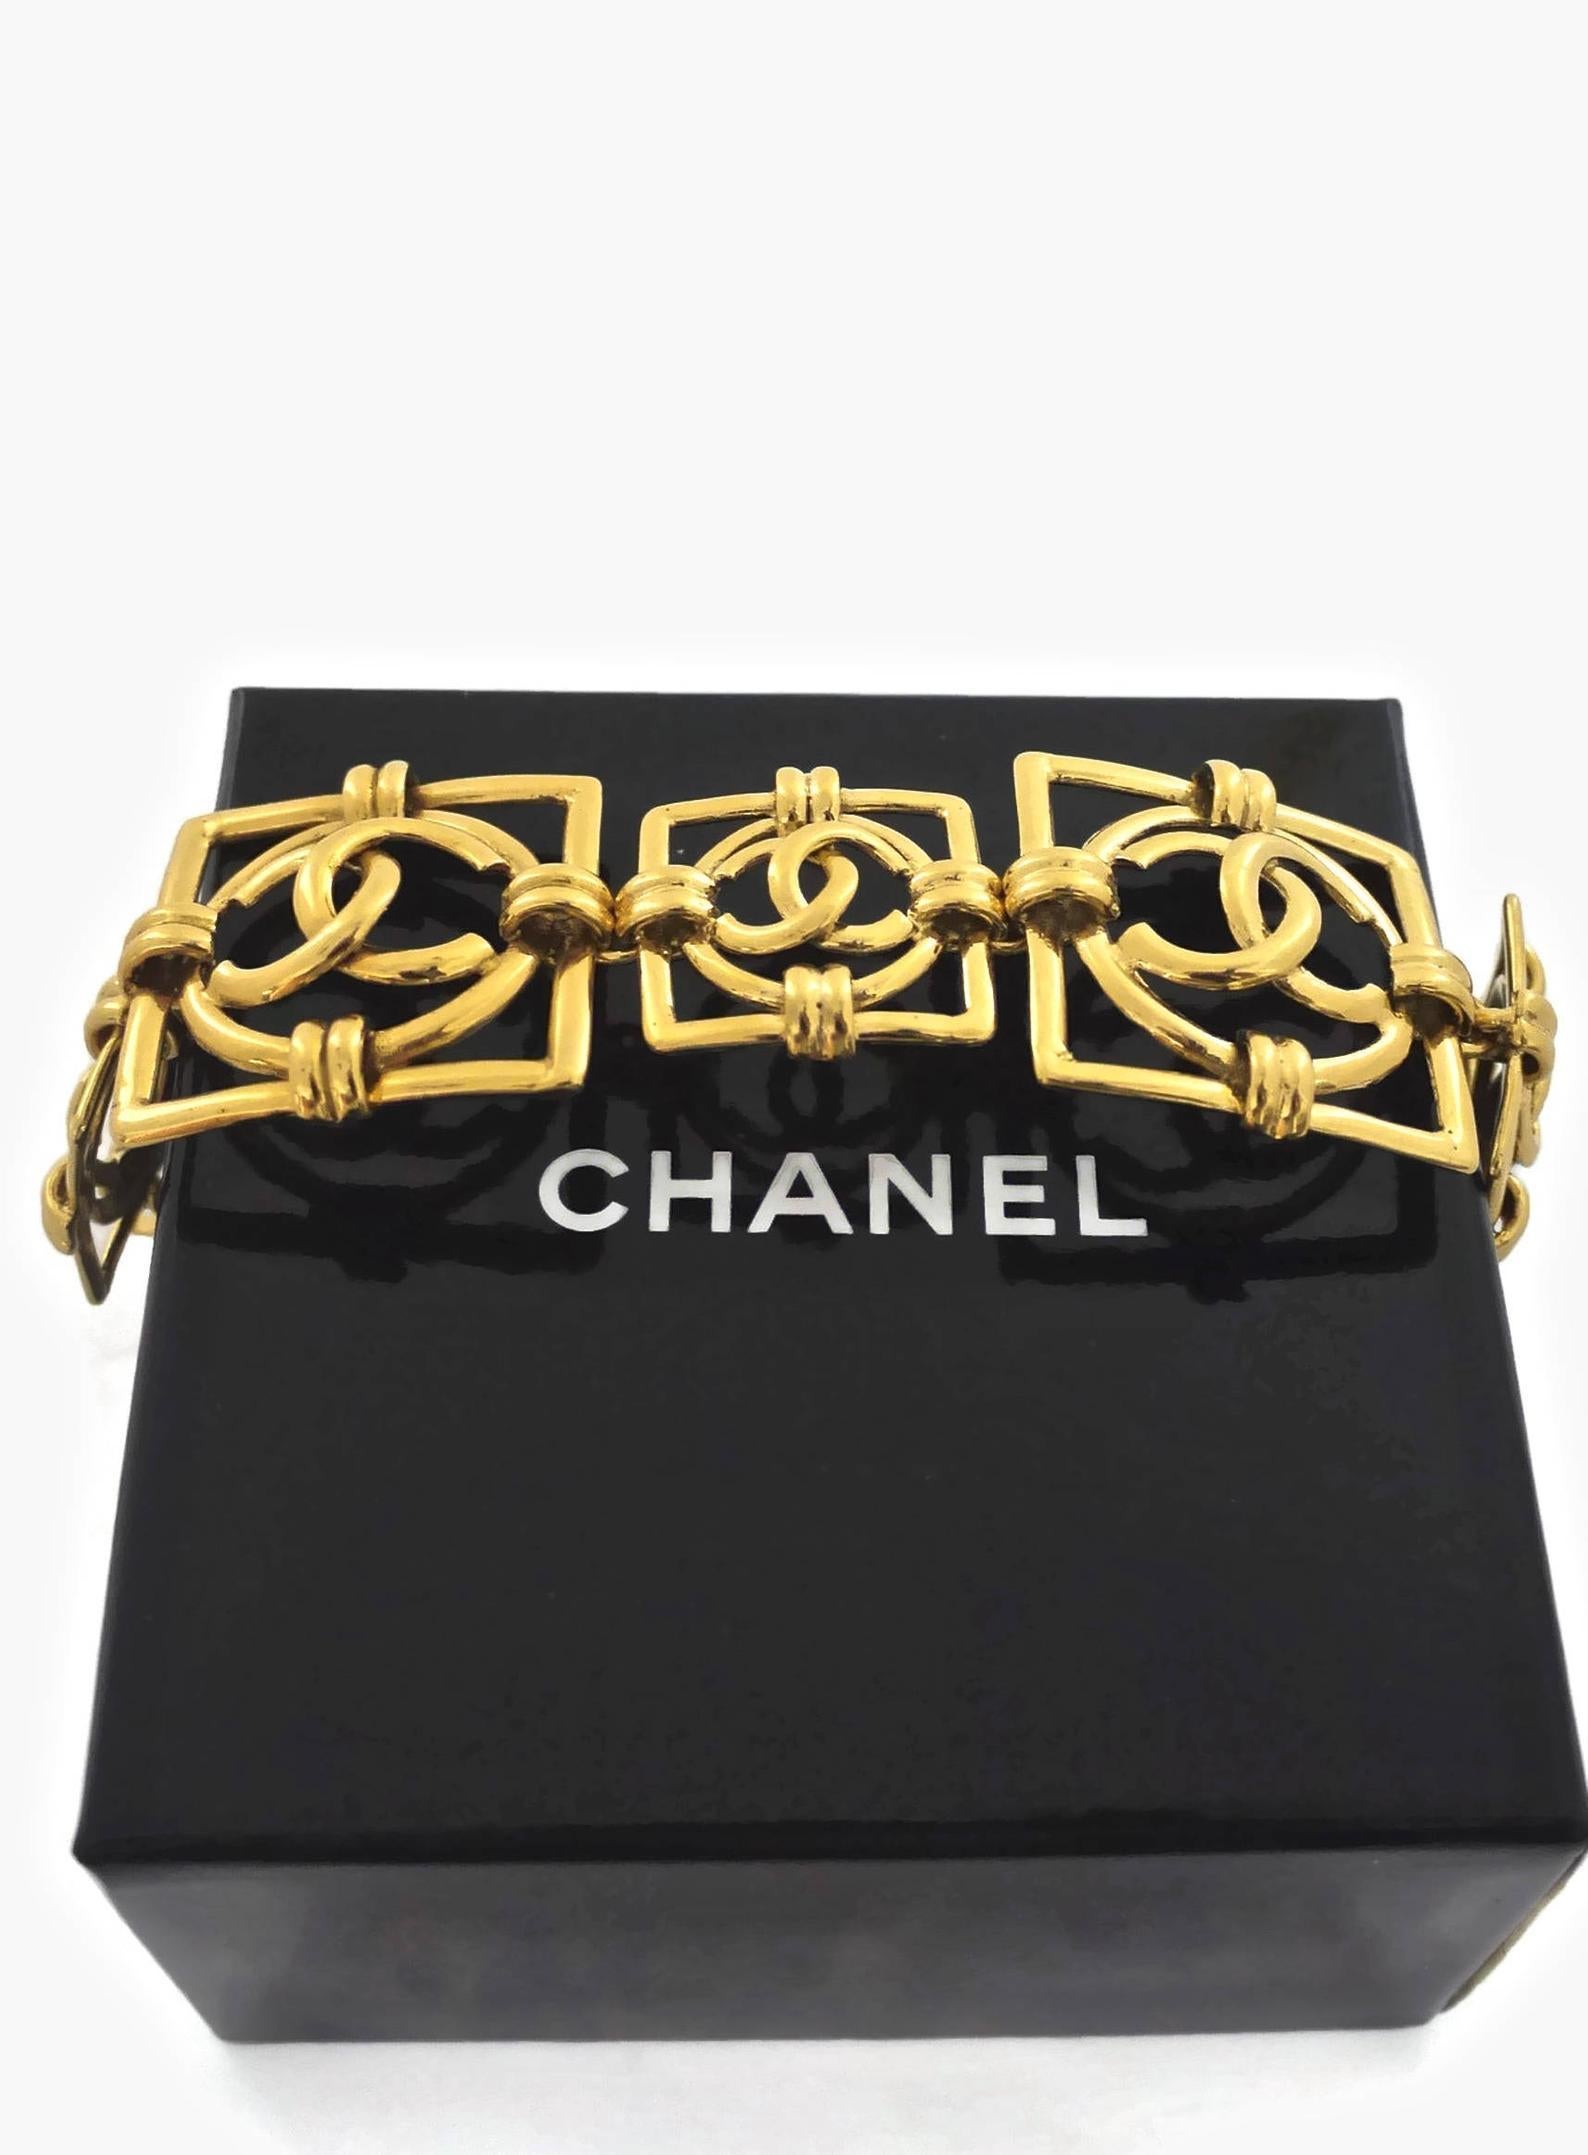 Vintage CHANEL Logo Openwork Link Bracelet

Measurements:
Height: 1.73 cms (4.4 cm)
Wearable Length: 6.88 inches (17.5 cm)

Features:
- 100% Authentic CHANEL.
- 5 articulated Chanel CC logo square discs.
- Signed CHANEL 2 CC 9 Made in France.
- Gold